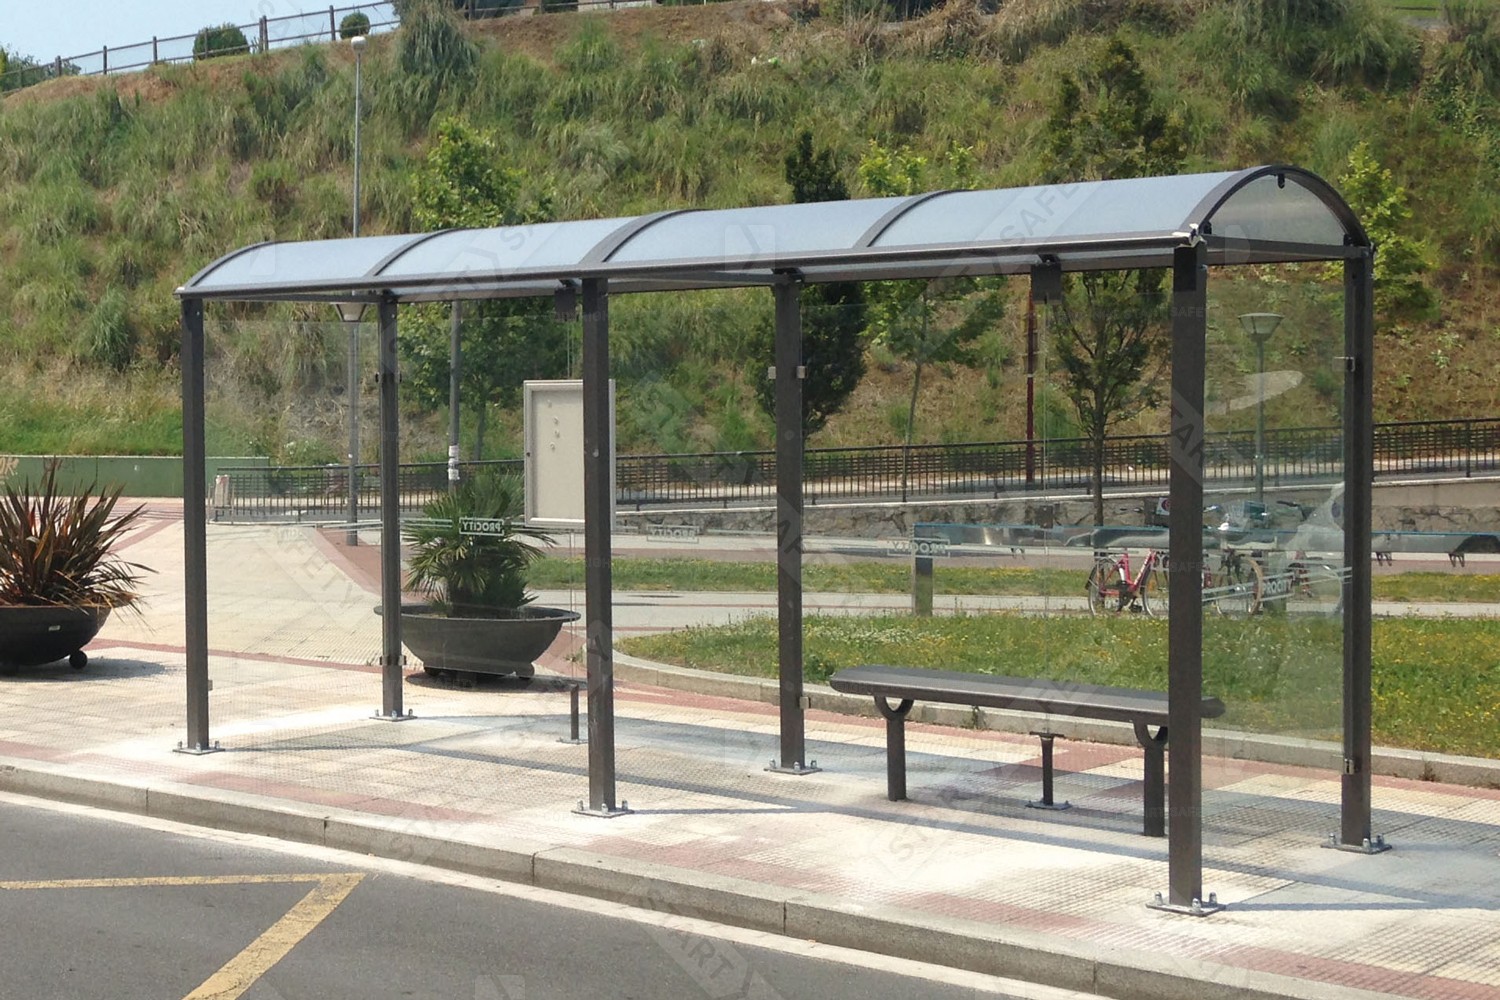 Procity Voute Bus Shelter Installed With Extention